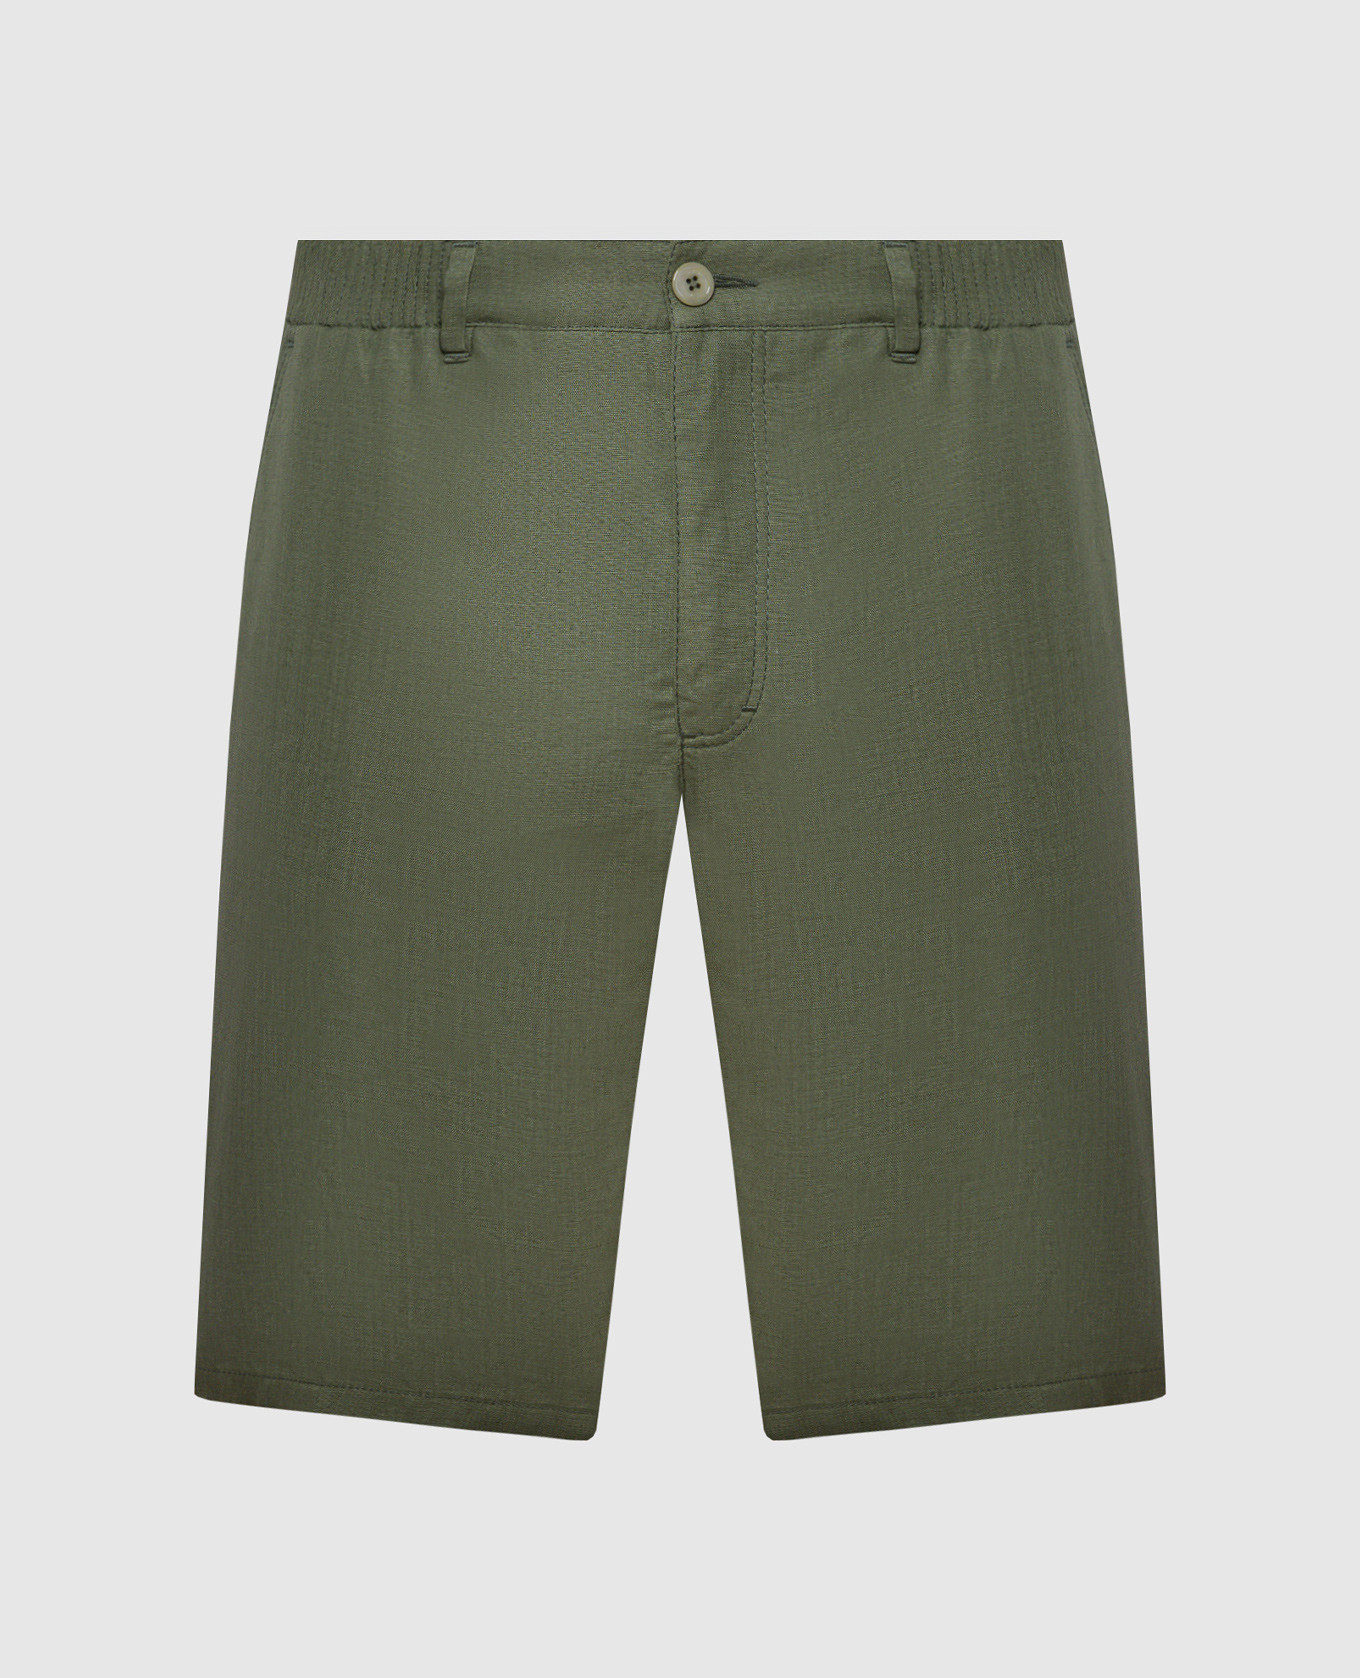 Green linen shorts with logo embroidery